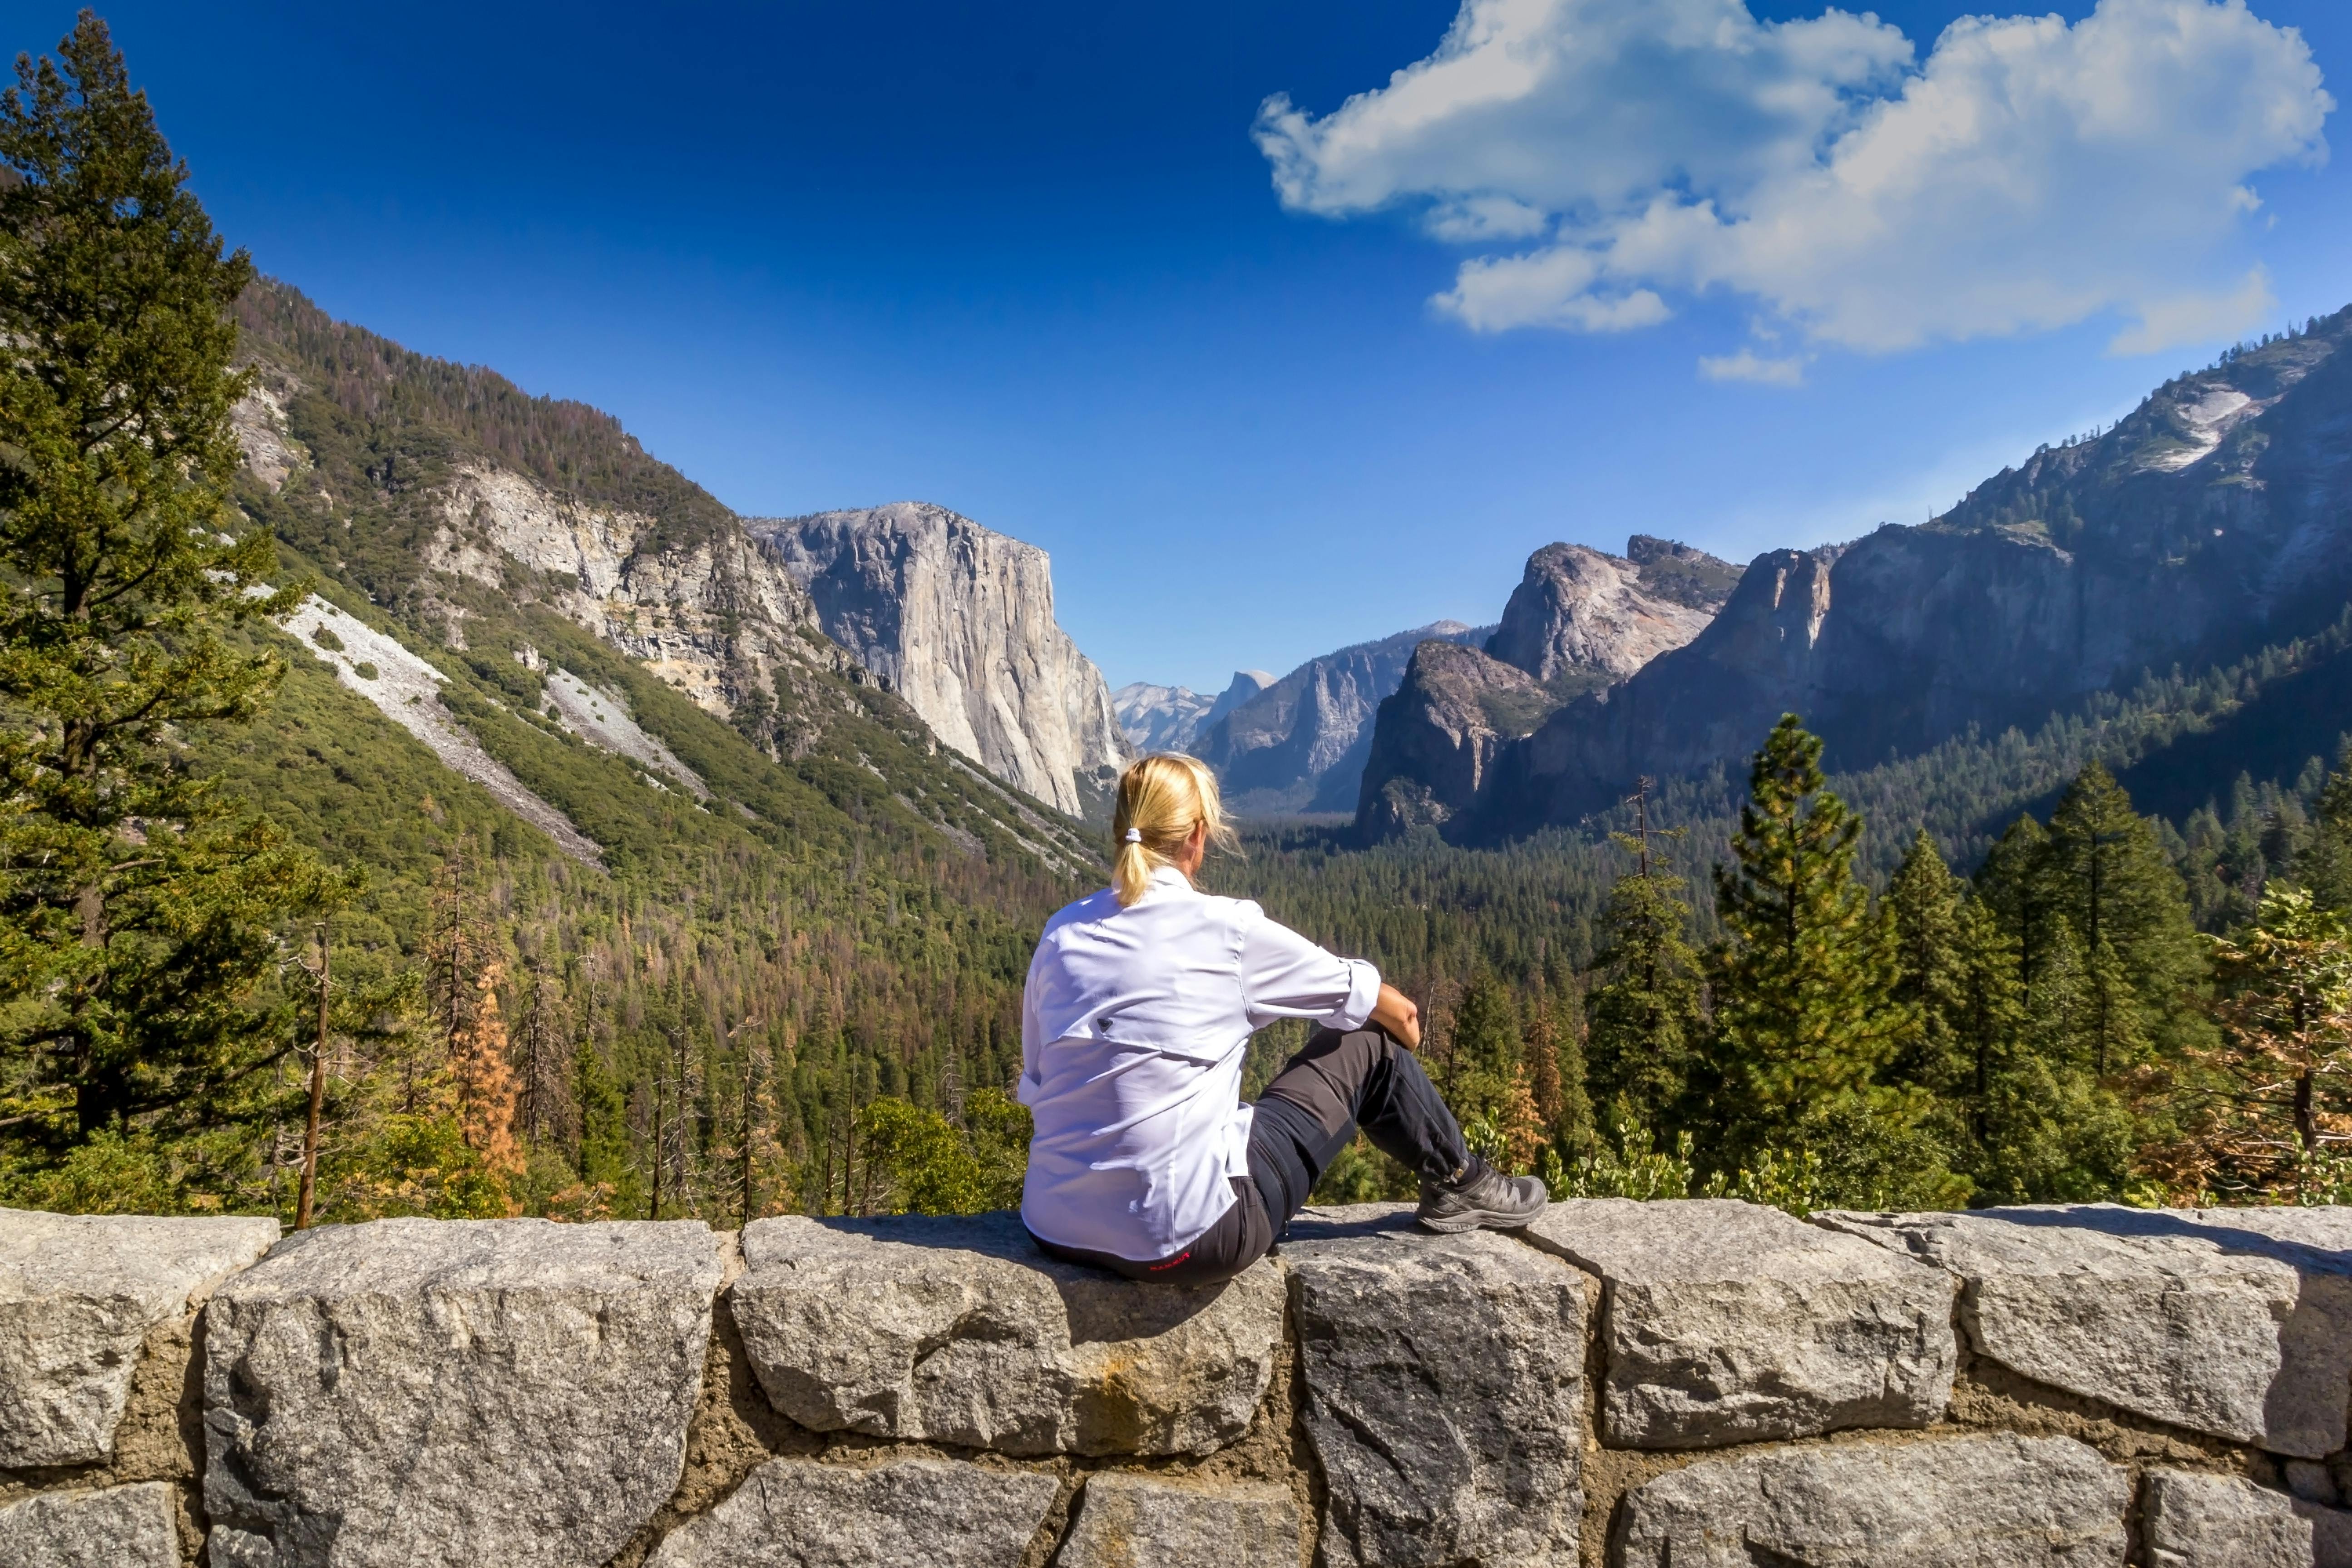 1-Day Yosemite and Giant Sequoia Tour from San Francisco